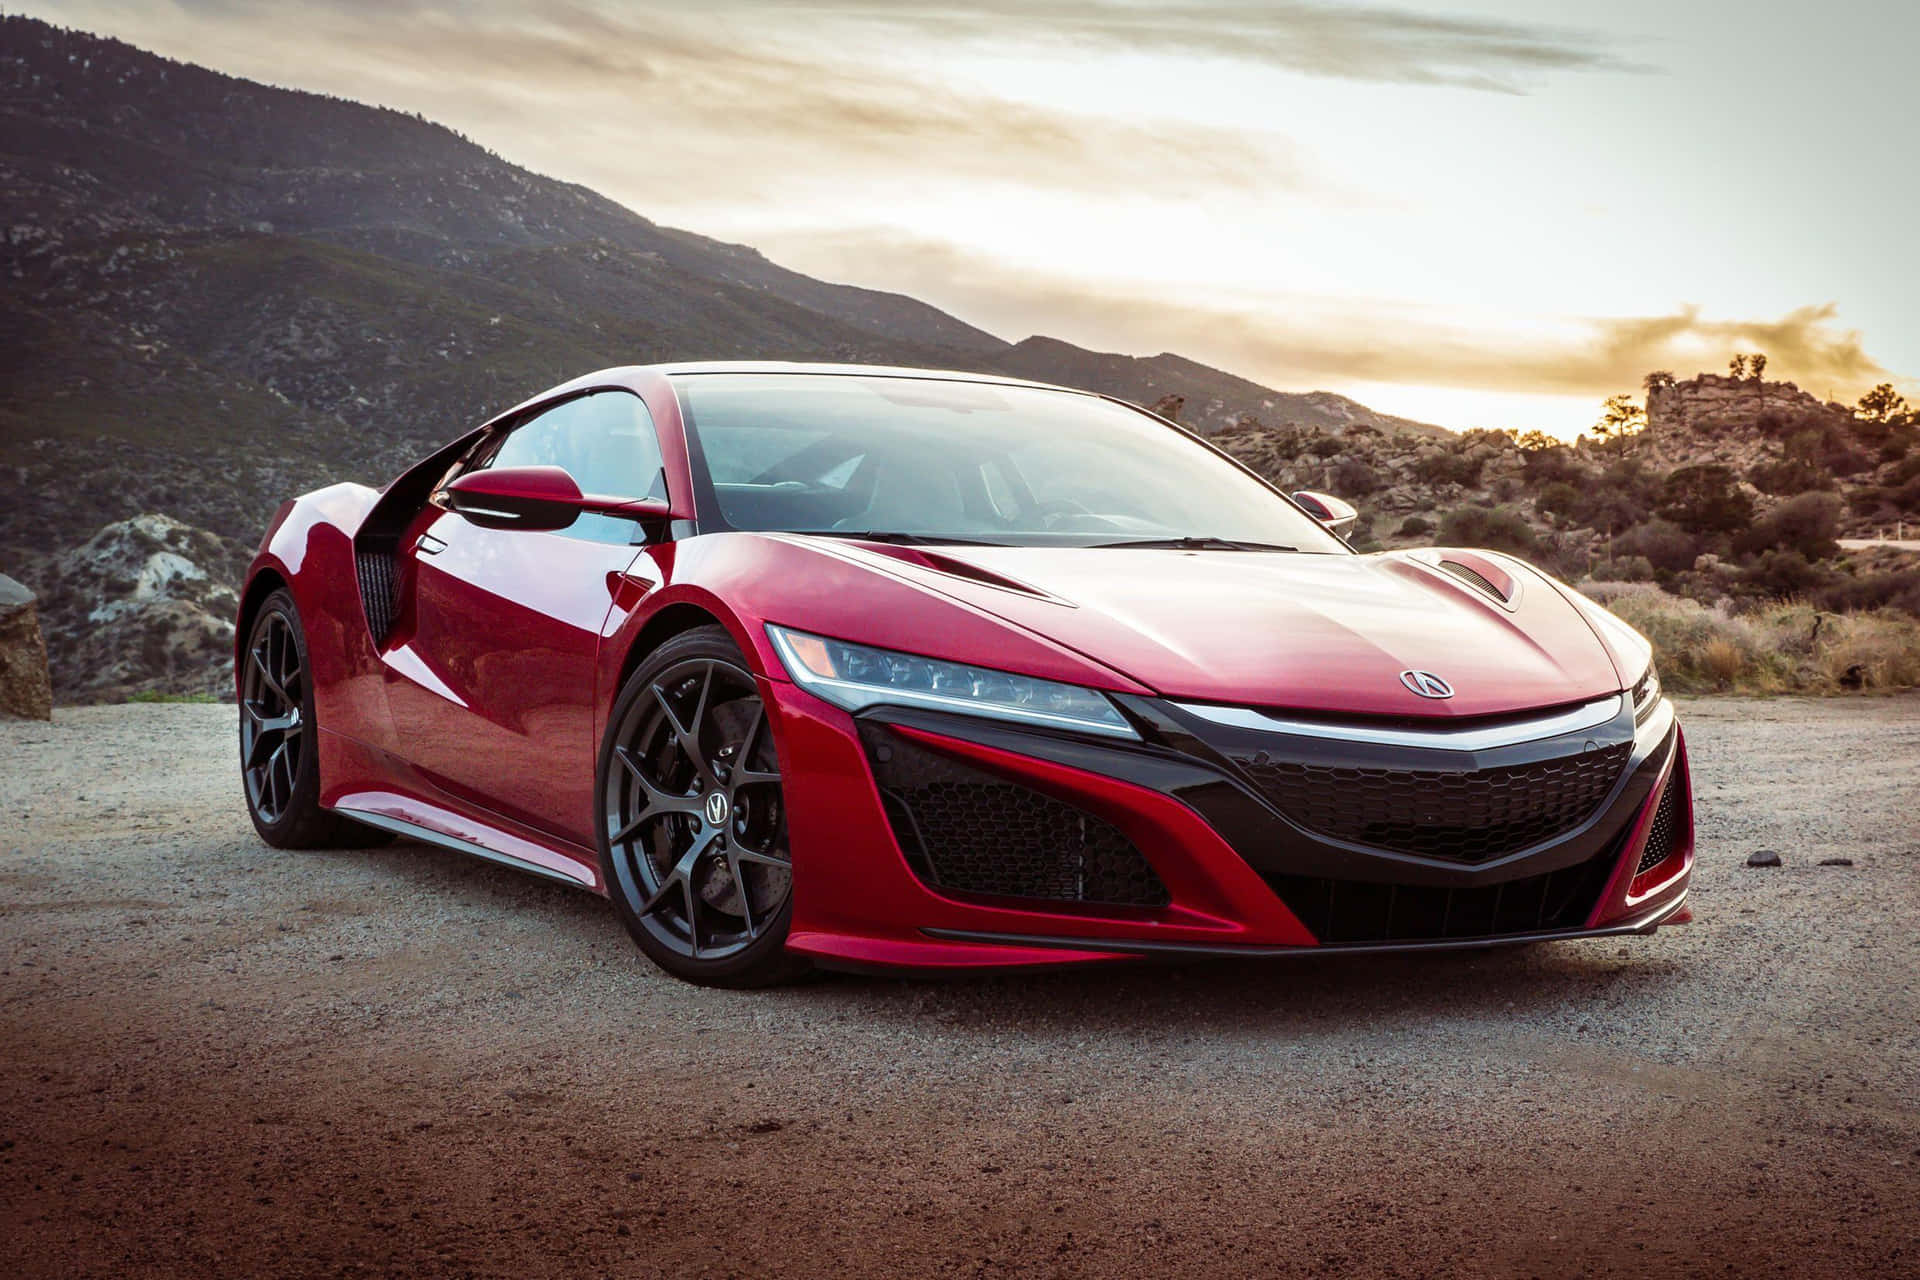 A Stunning Acura NSX Sports Car in Action Wallpaper